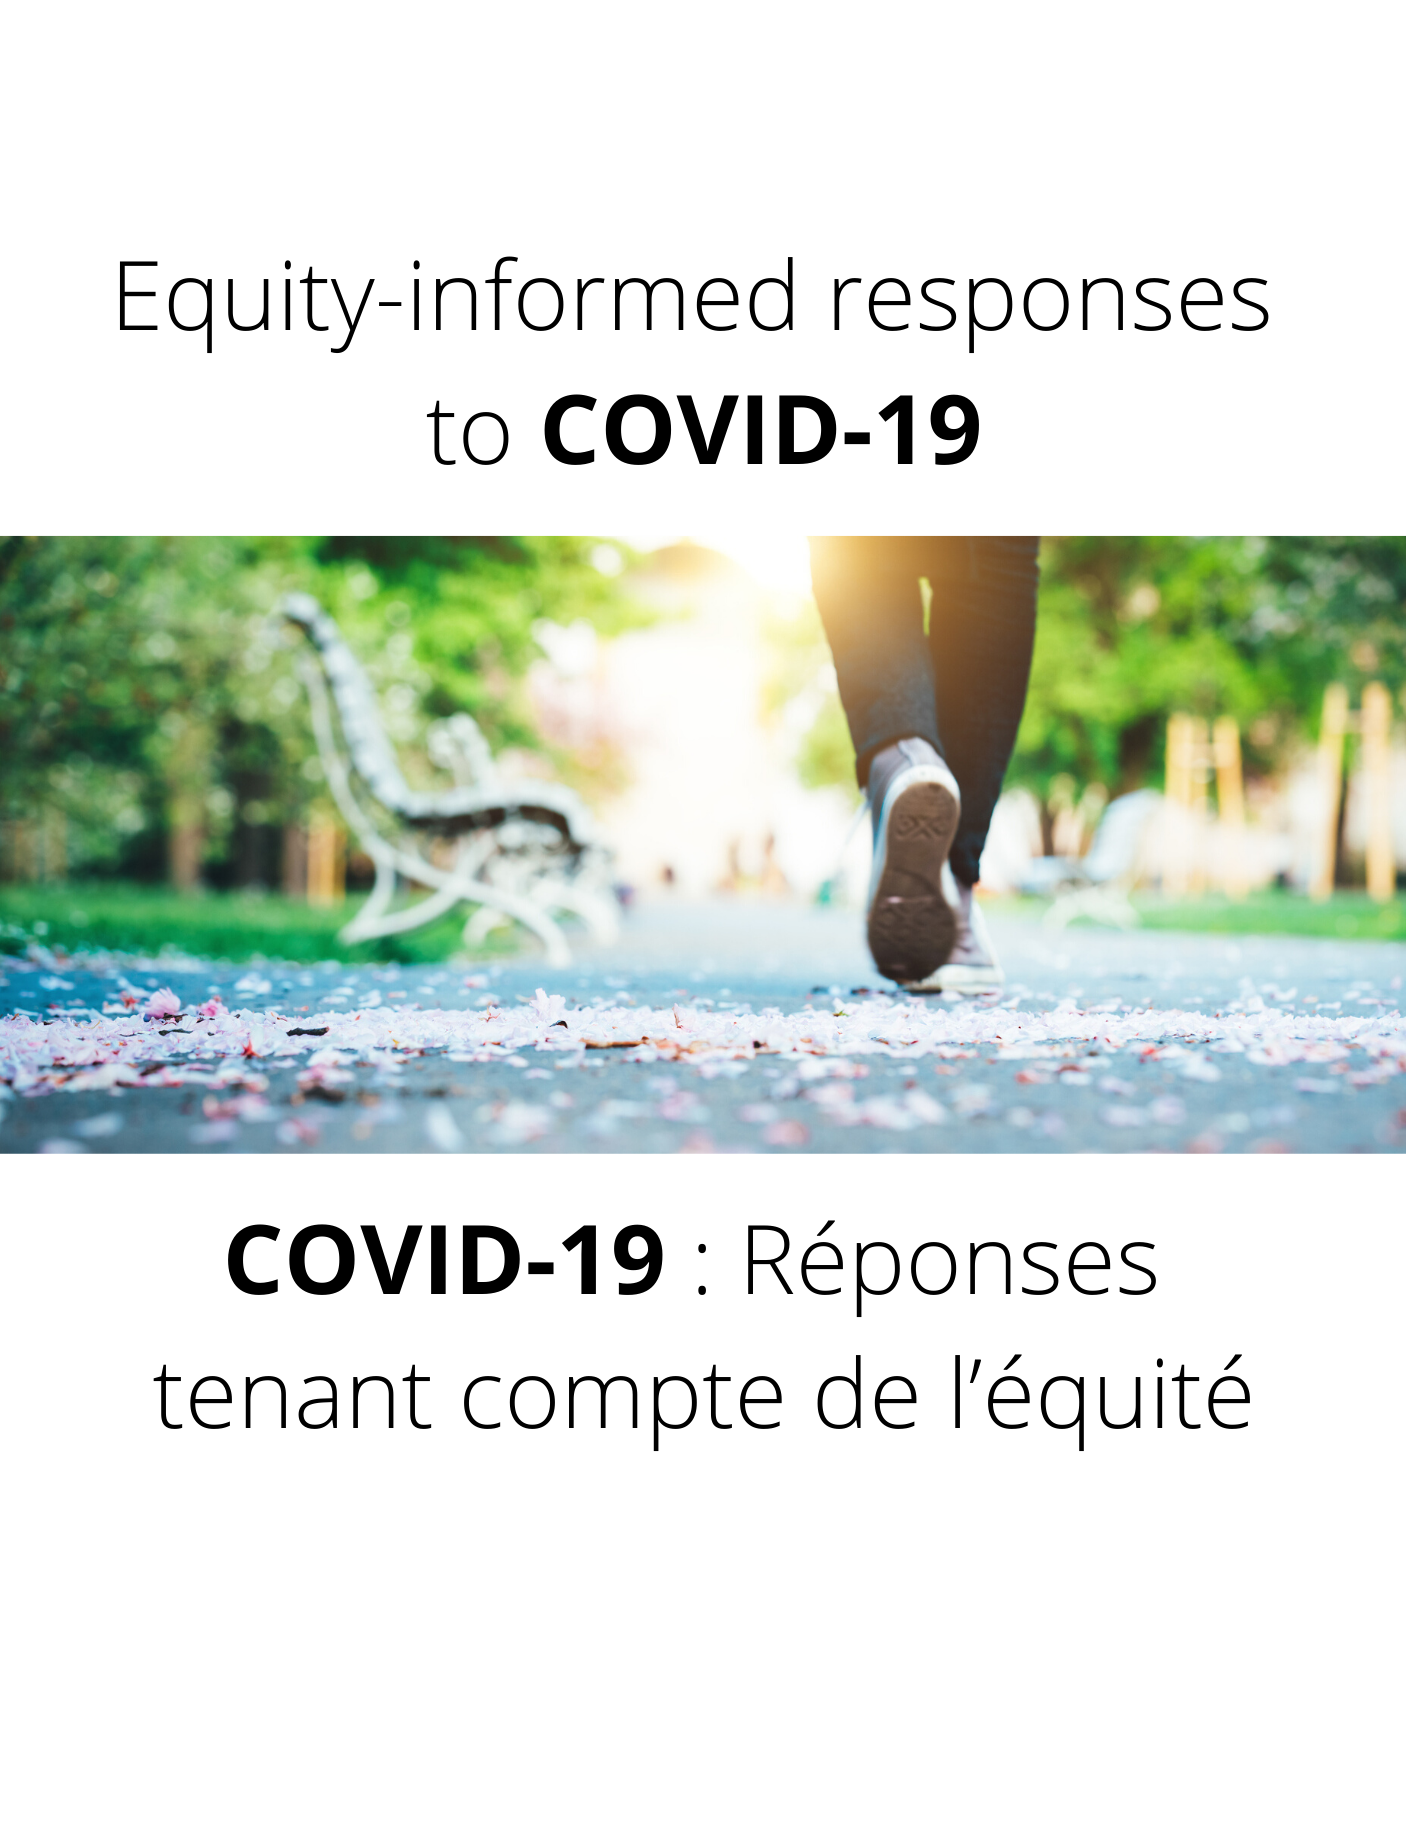 A socially just recovery from the COVID-19 pandemic: A call for action on the social determinants of urban health inequalities